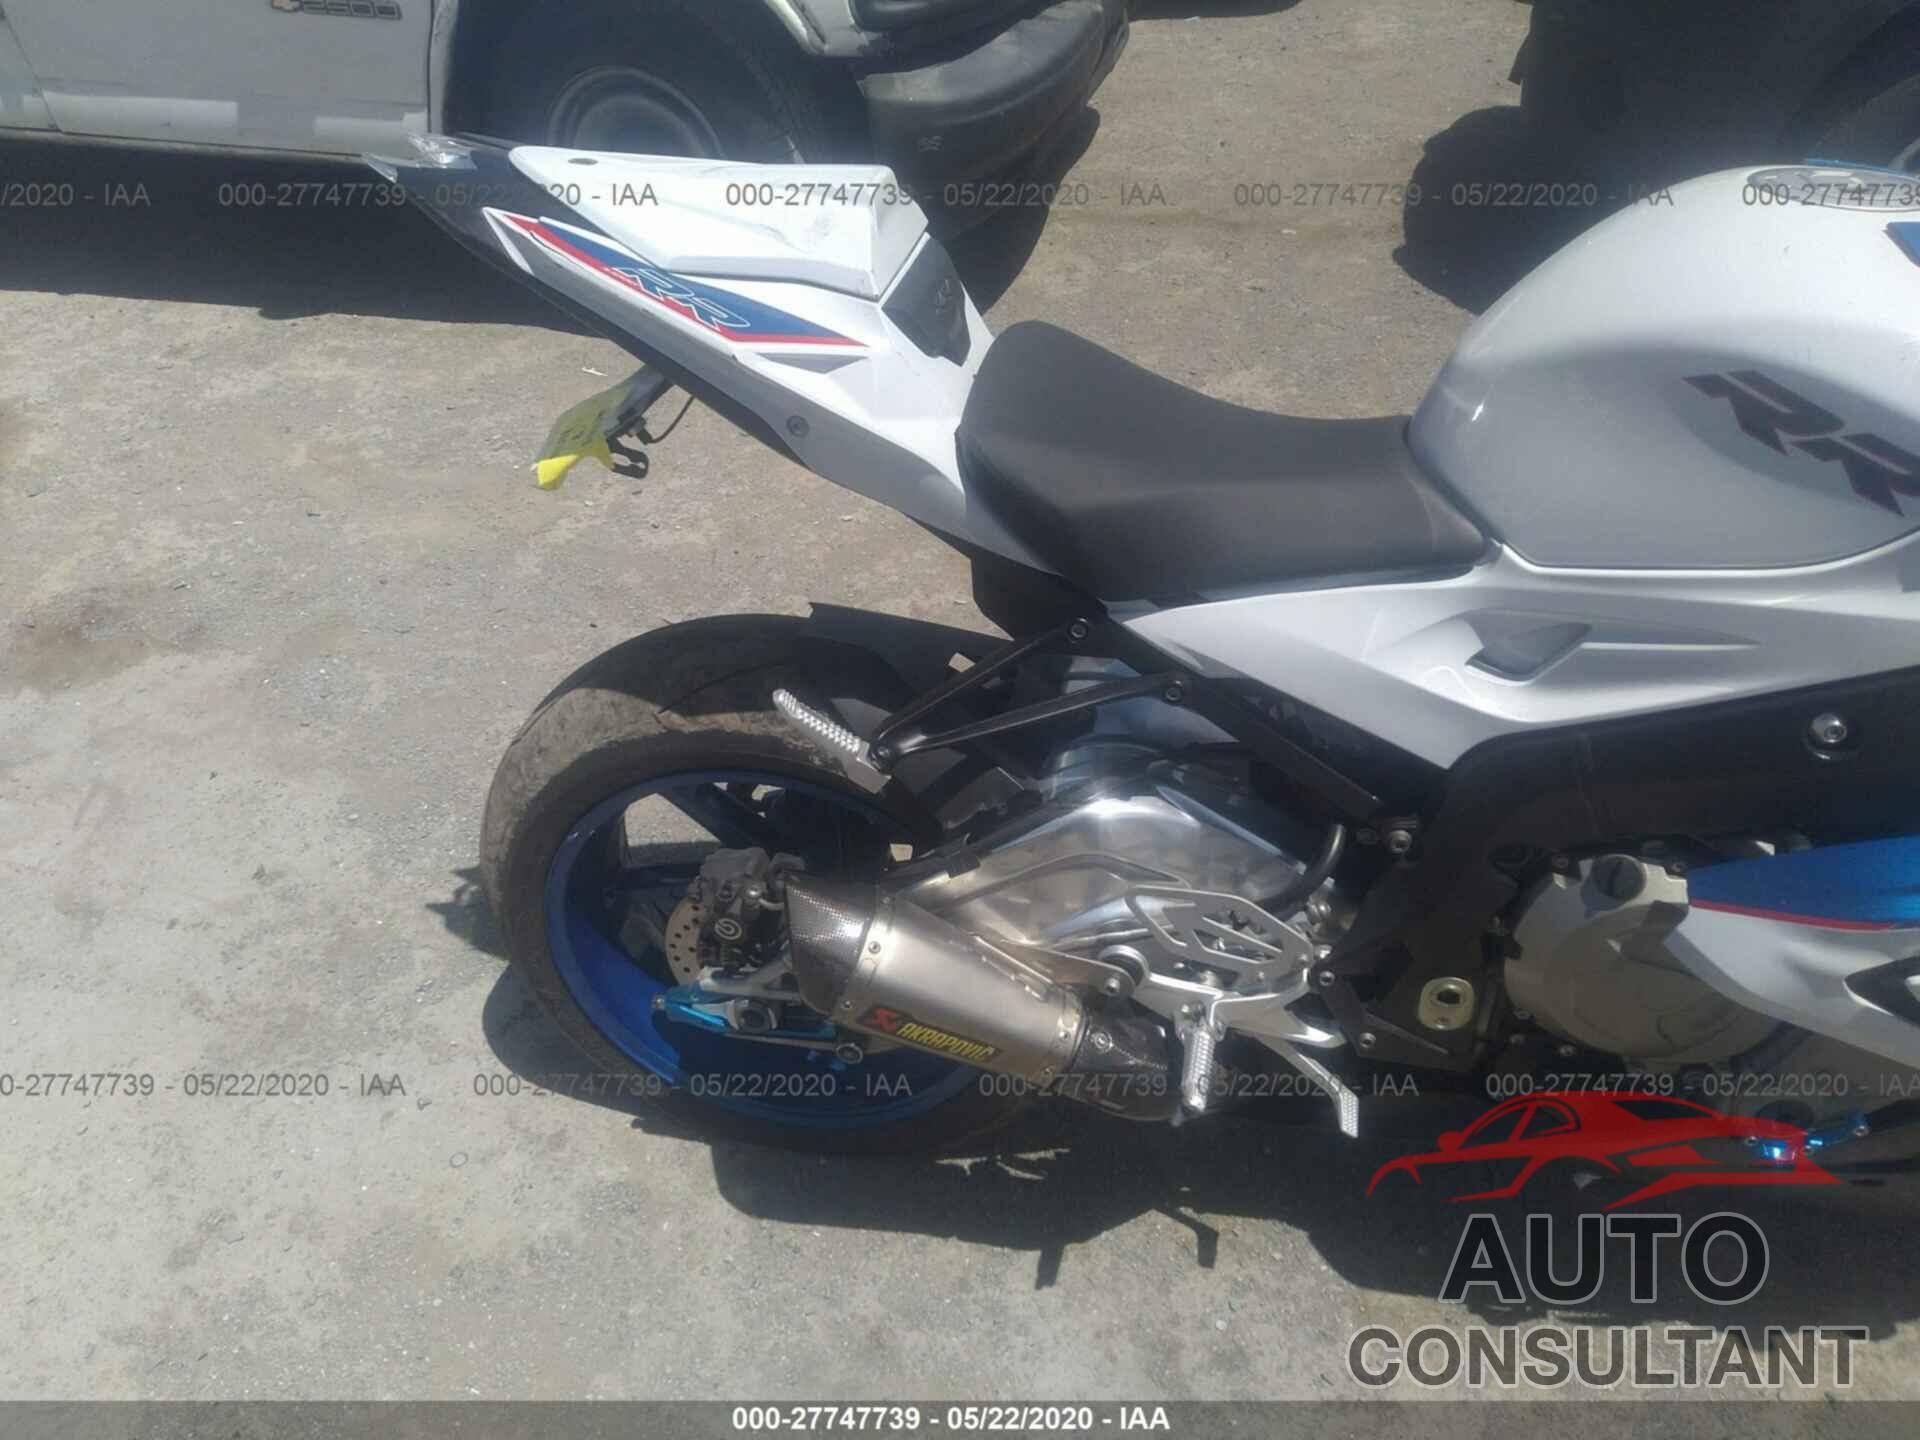 BMW S 1000 2016 - WB10D2100GZ354148